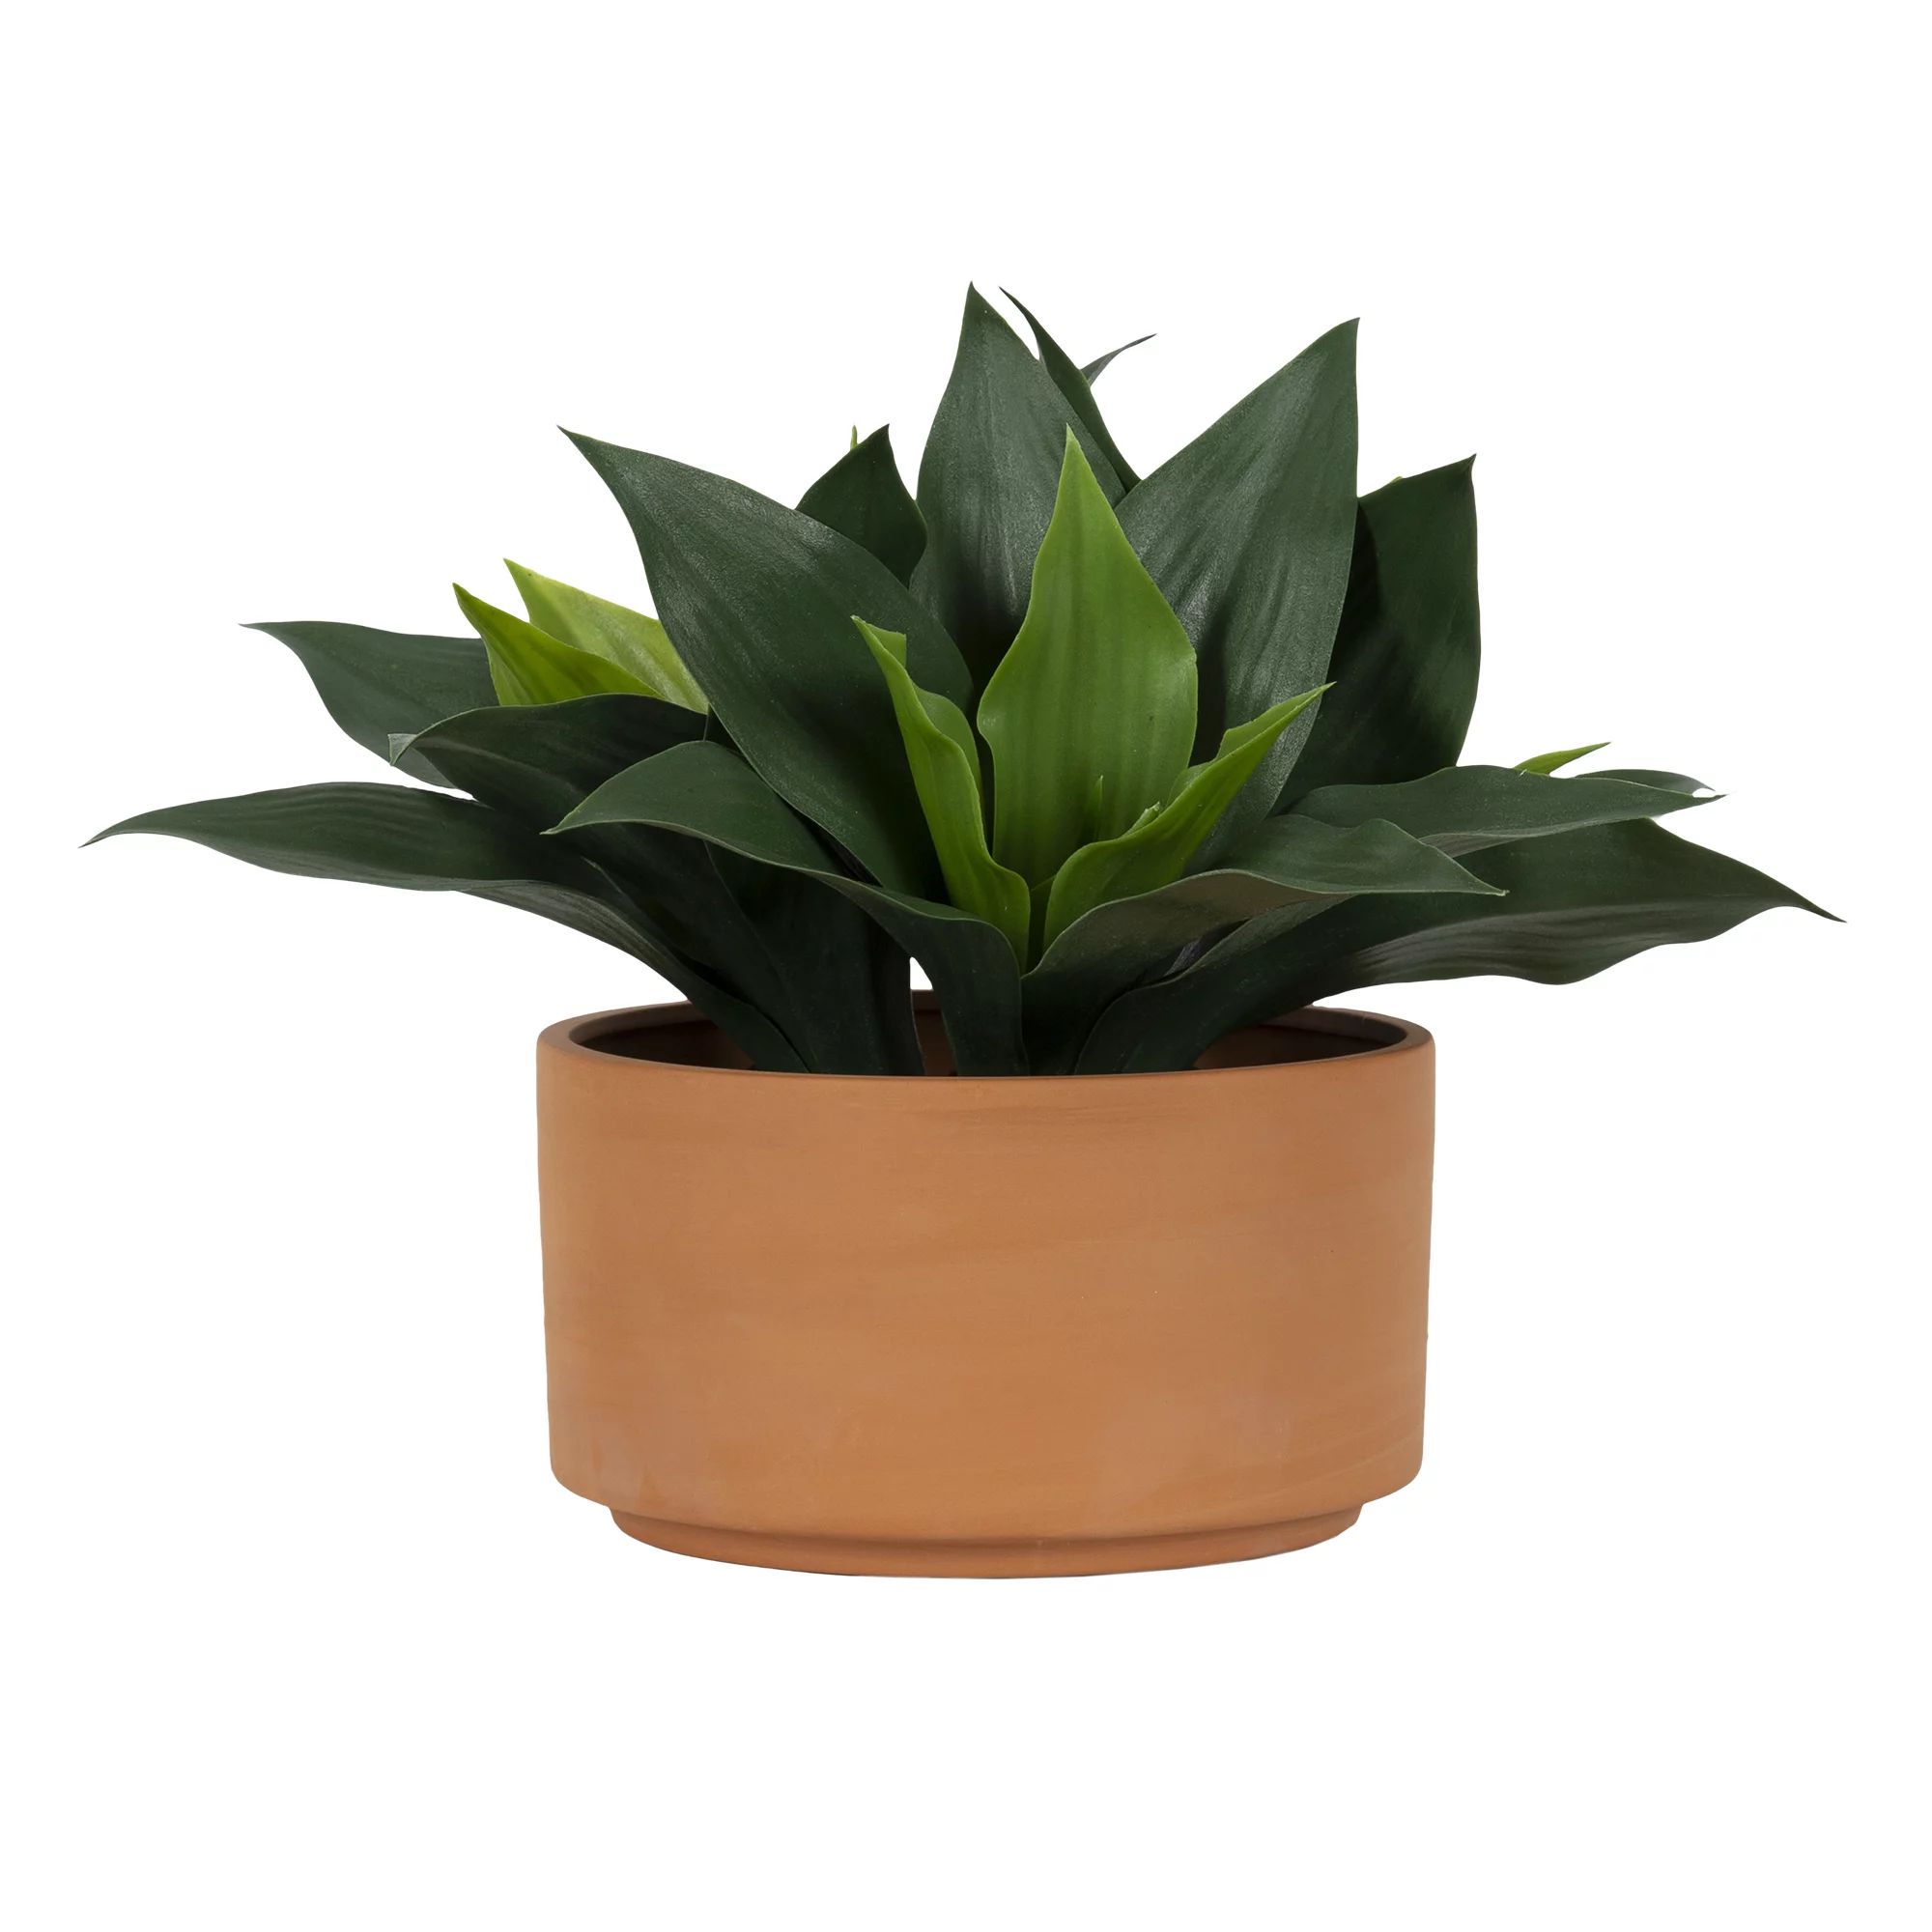 Better Homes & Gardens Faux Agave Plant in Terracotta Planter, 9.25" x 9" | Walmart (US)